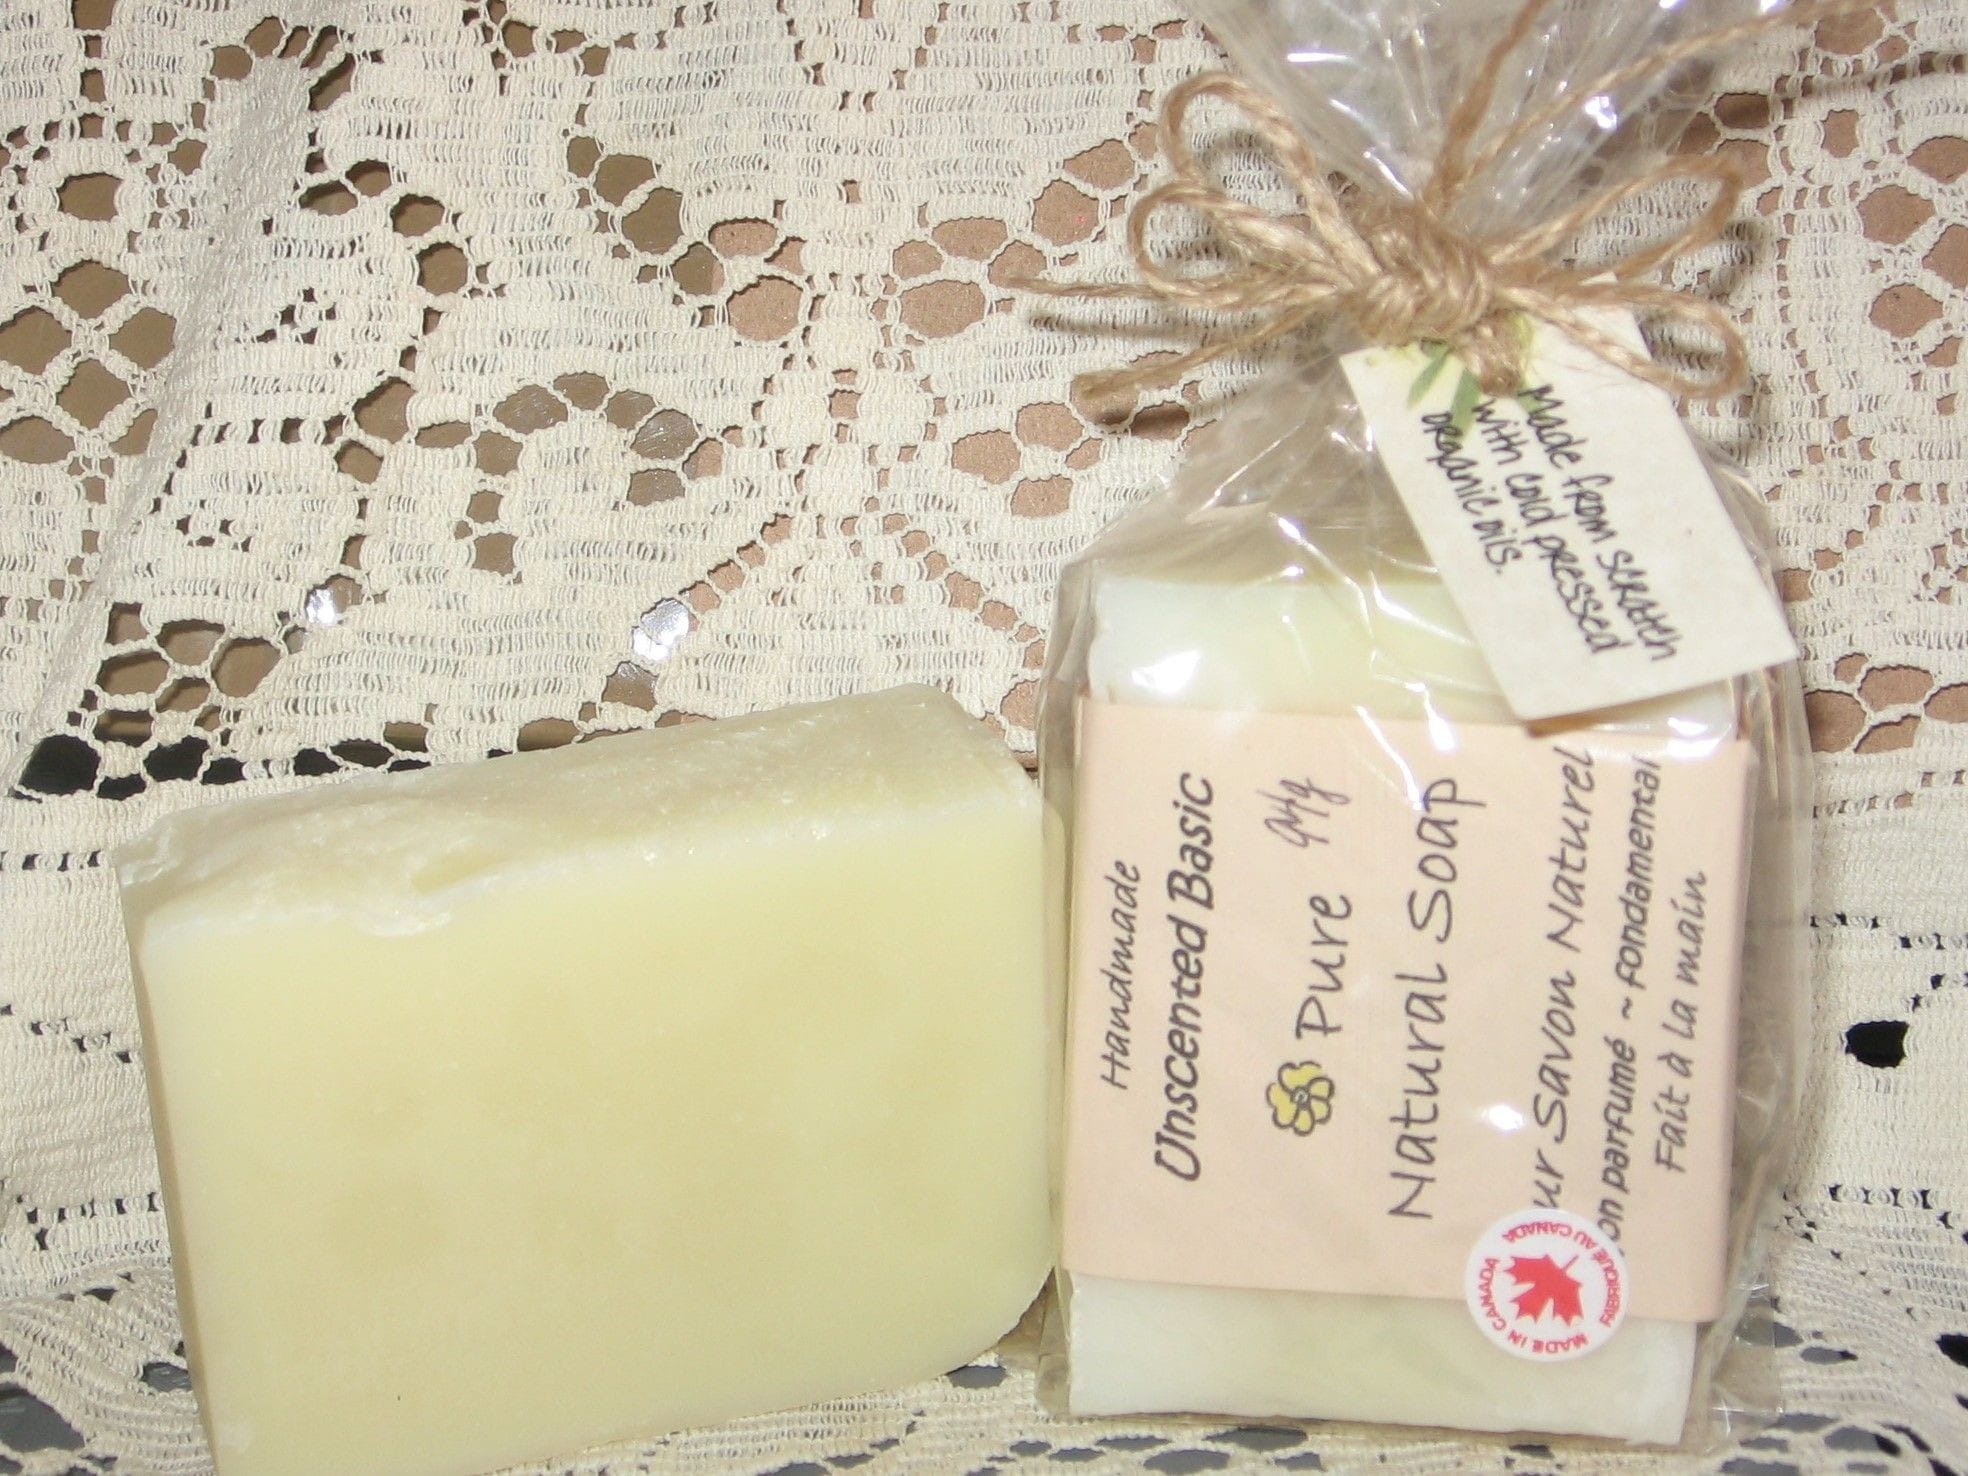 This variety of our basic pure natural soap is completely unscented and made from cold pressed organic oils.  Great family soap choice, vegan and long lasting.